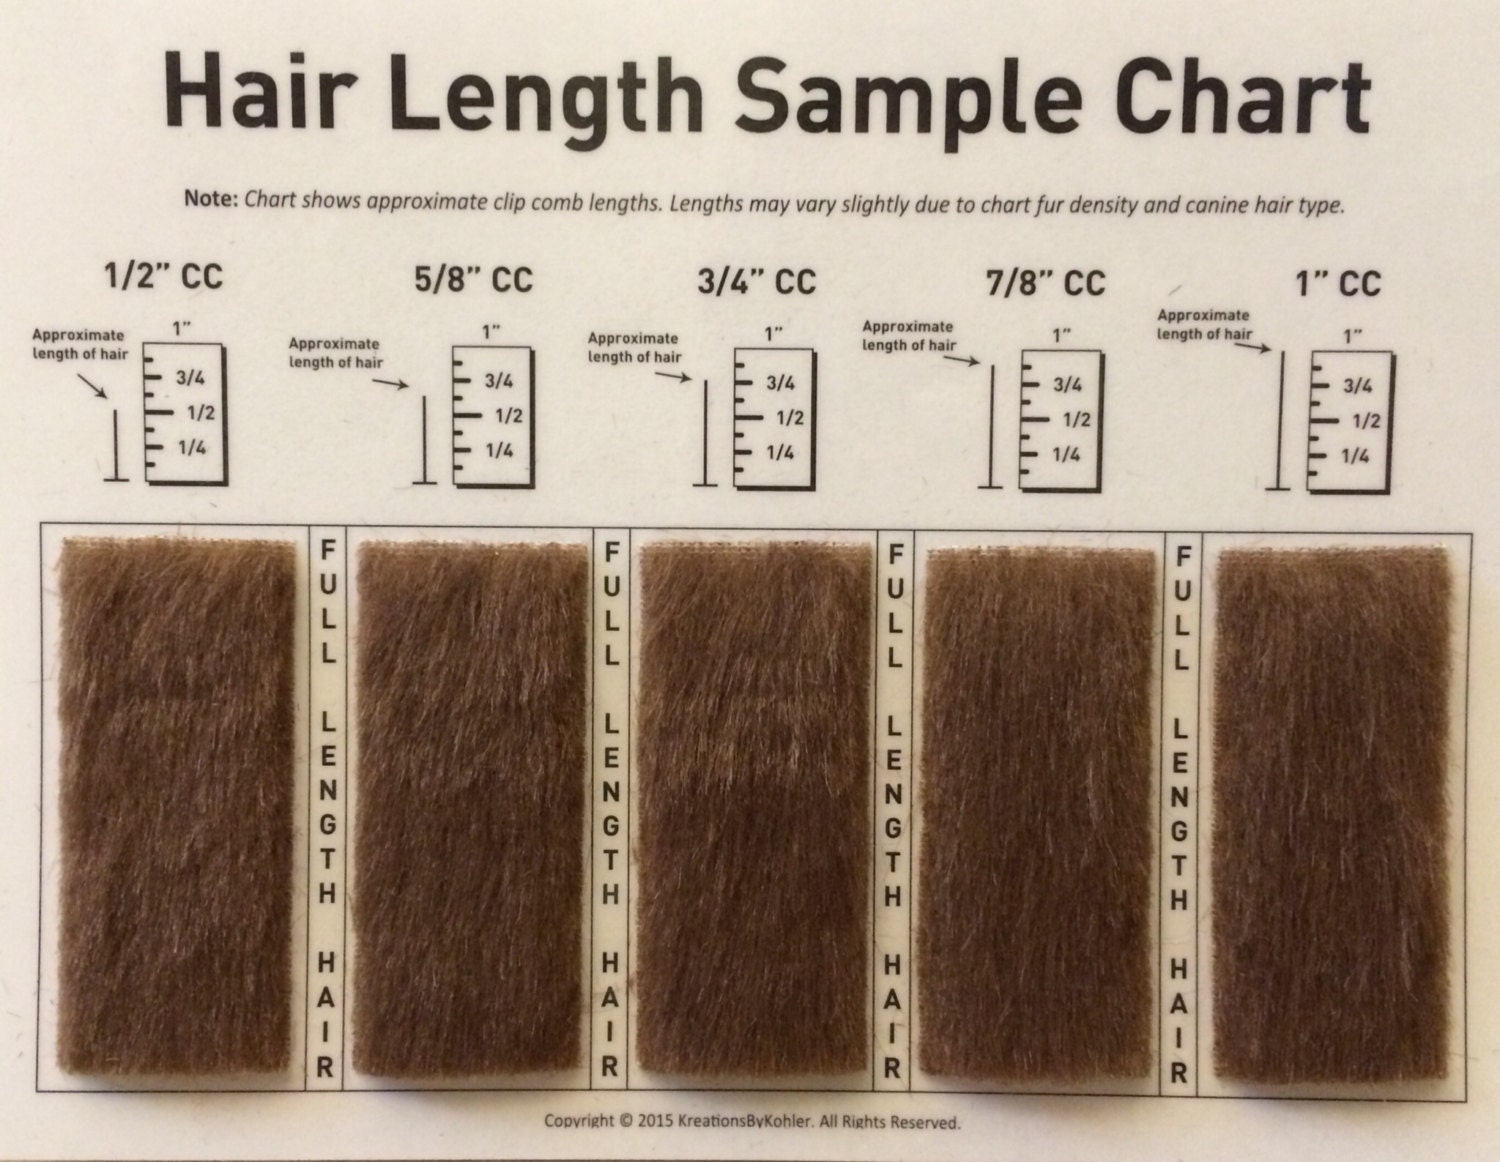 Clip Comb Sample Chart for Grooming